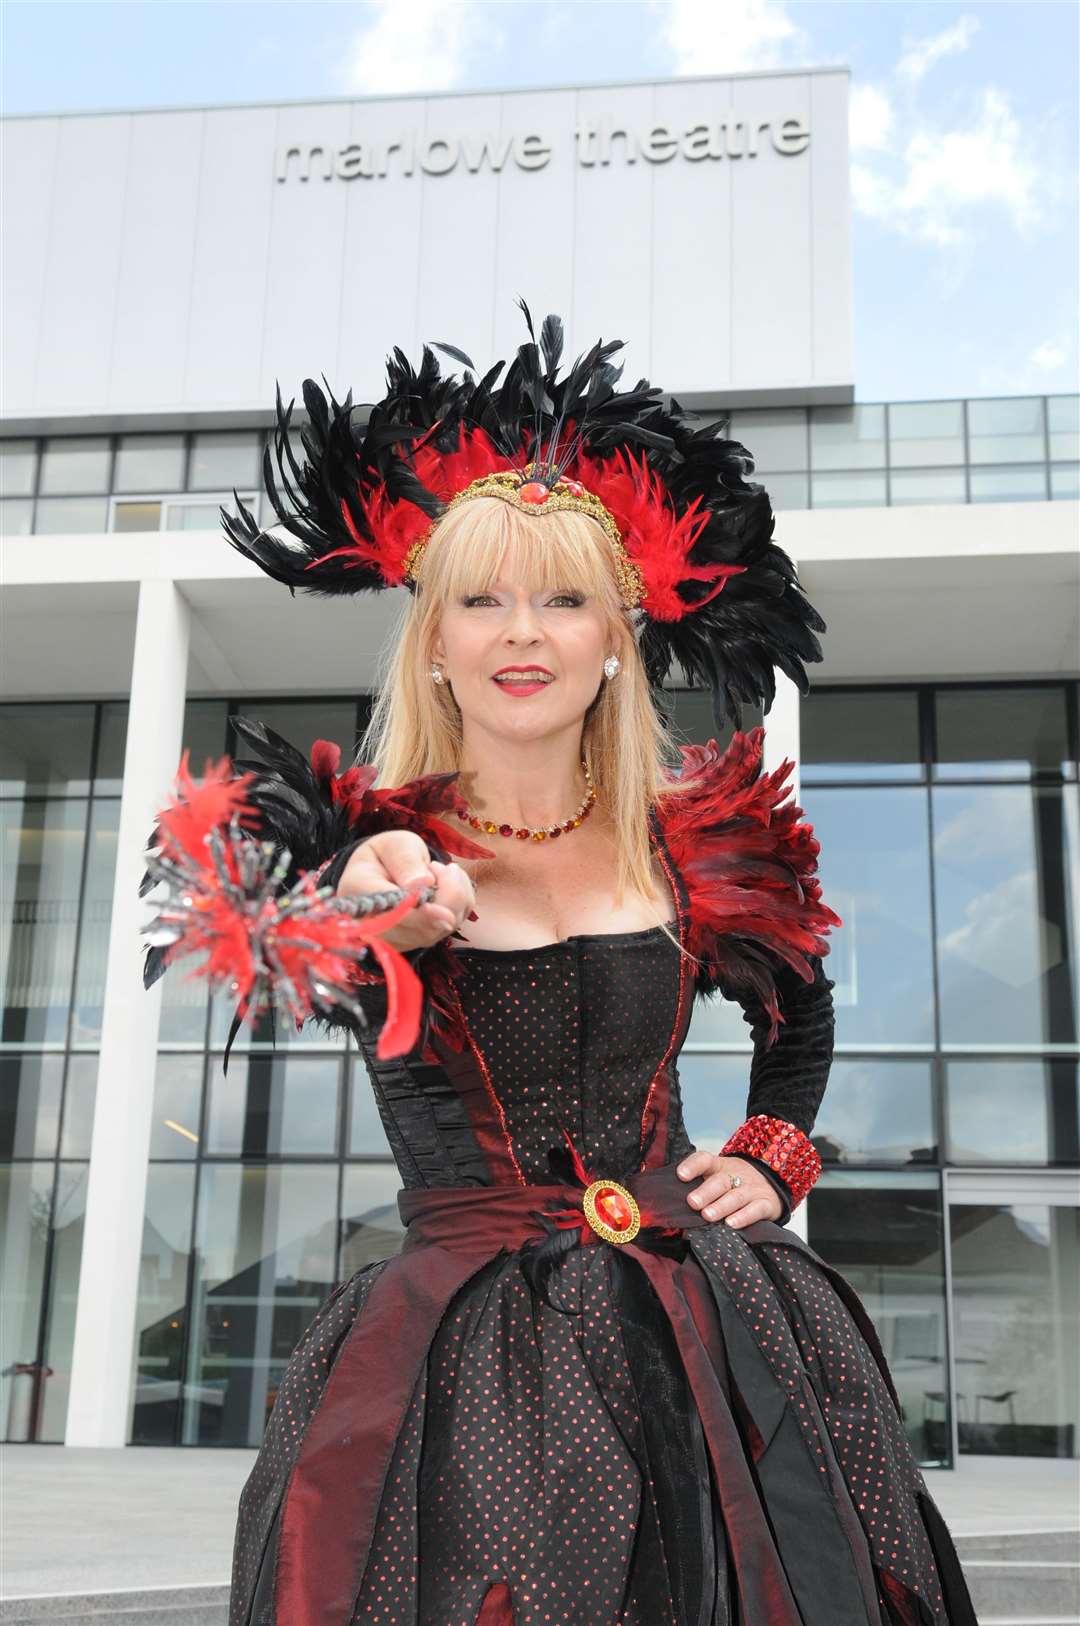 Toyah Willcox has proved a popular draw - notably with performances at the Marlowe Theatre in Canterbury